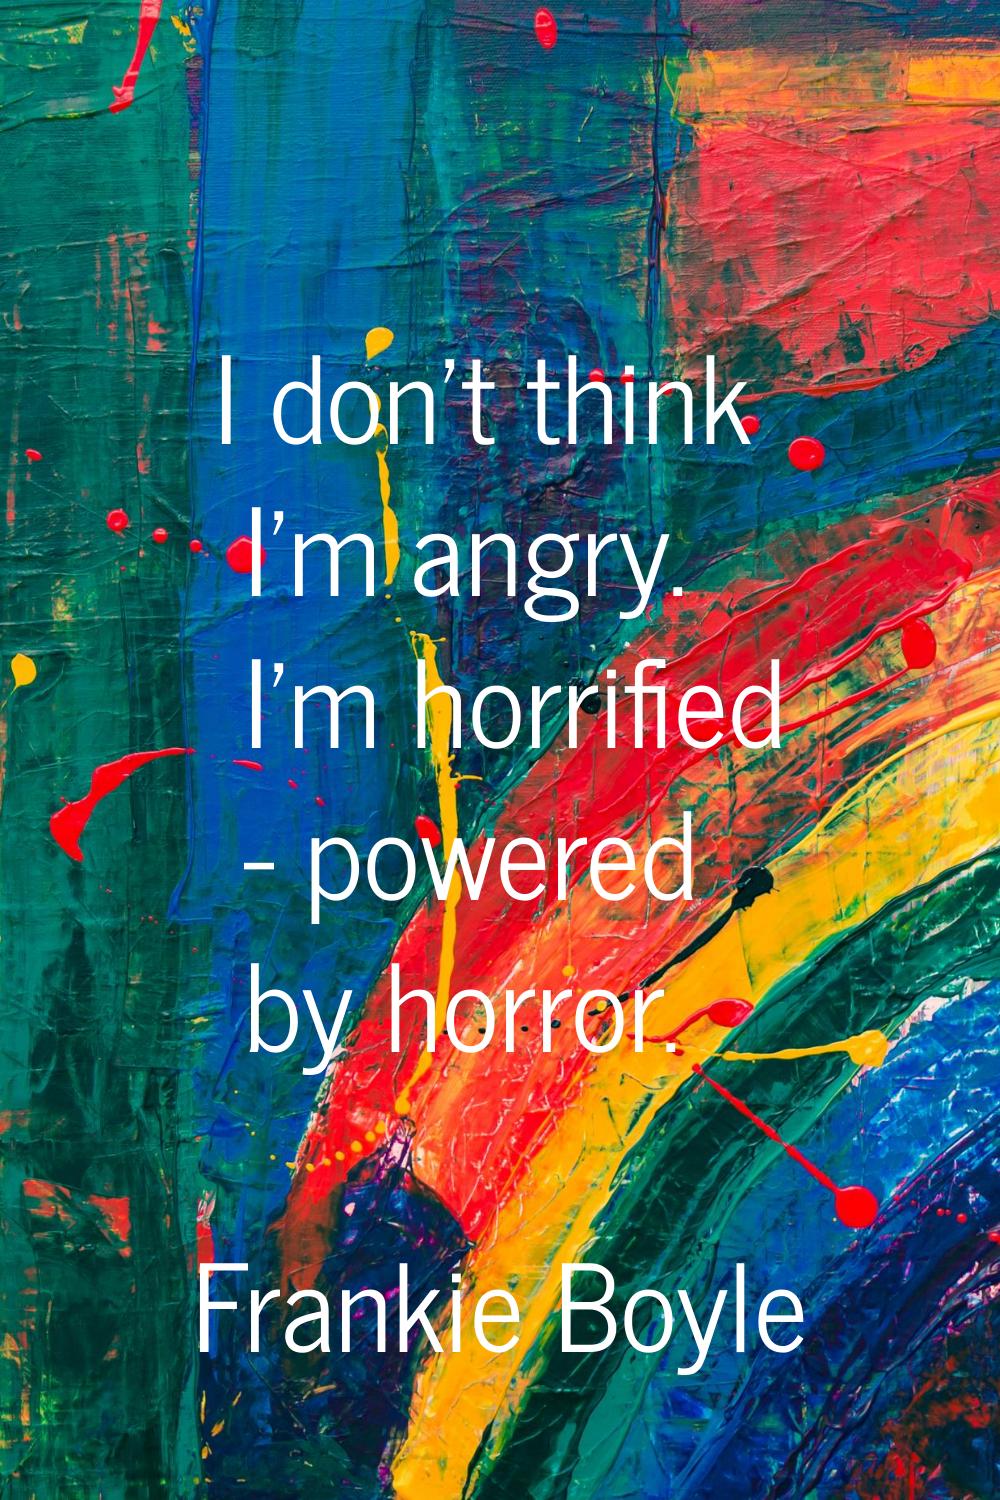 I don't think I'm angry. I'm horrified - powered by horror.